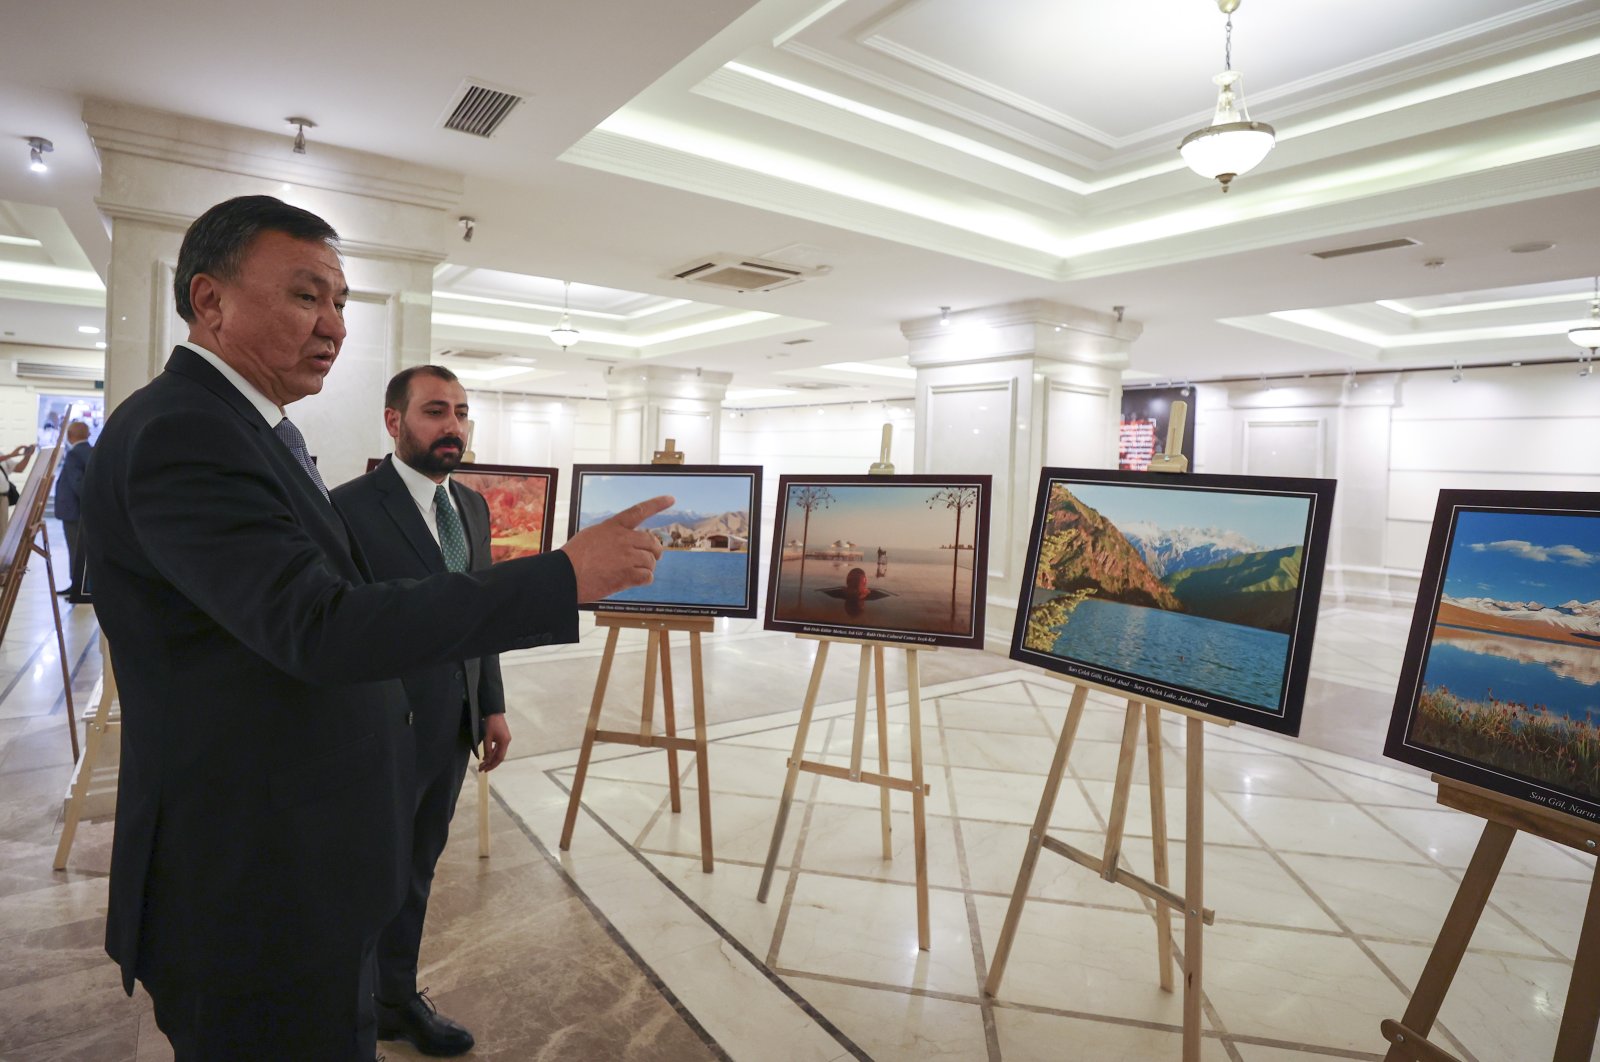 Kyrgyzstan's Ambassador Kubanychbek Omuraliev (L) visits an exhibition to mark the 30th anniversary of the Central Asian nation's independence in the capital Ankara, Turkey, Aug. 23, 2021. (AA Photo)